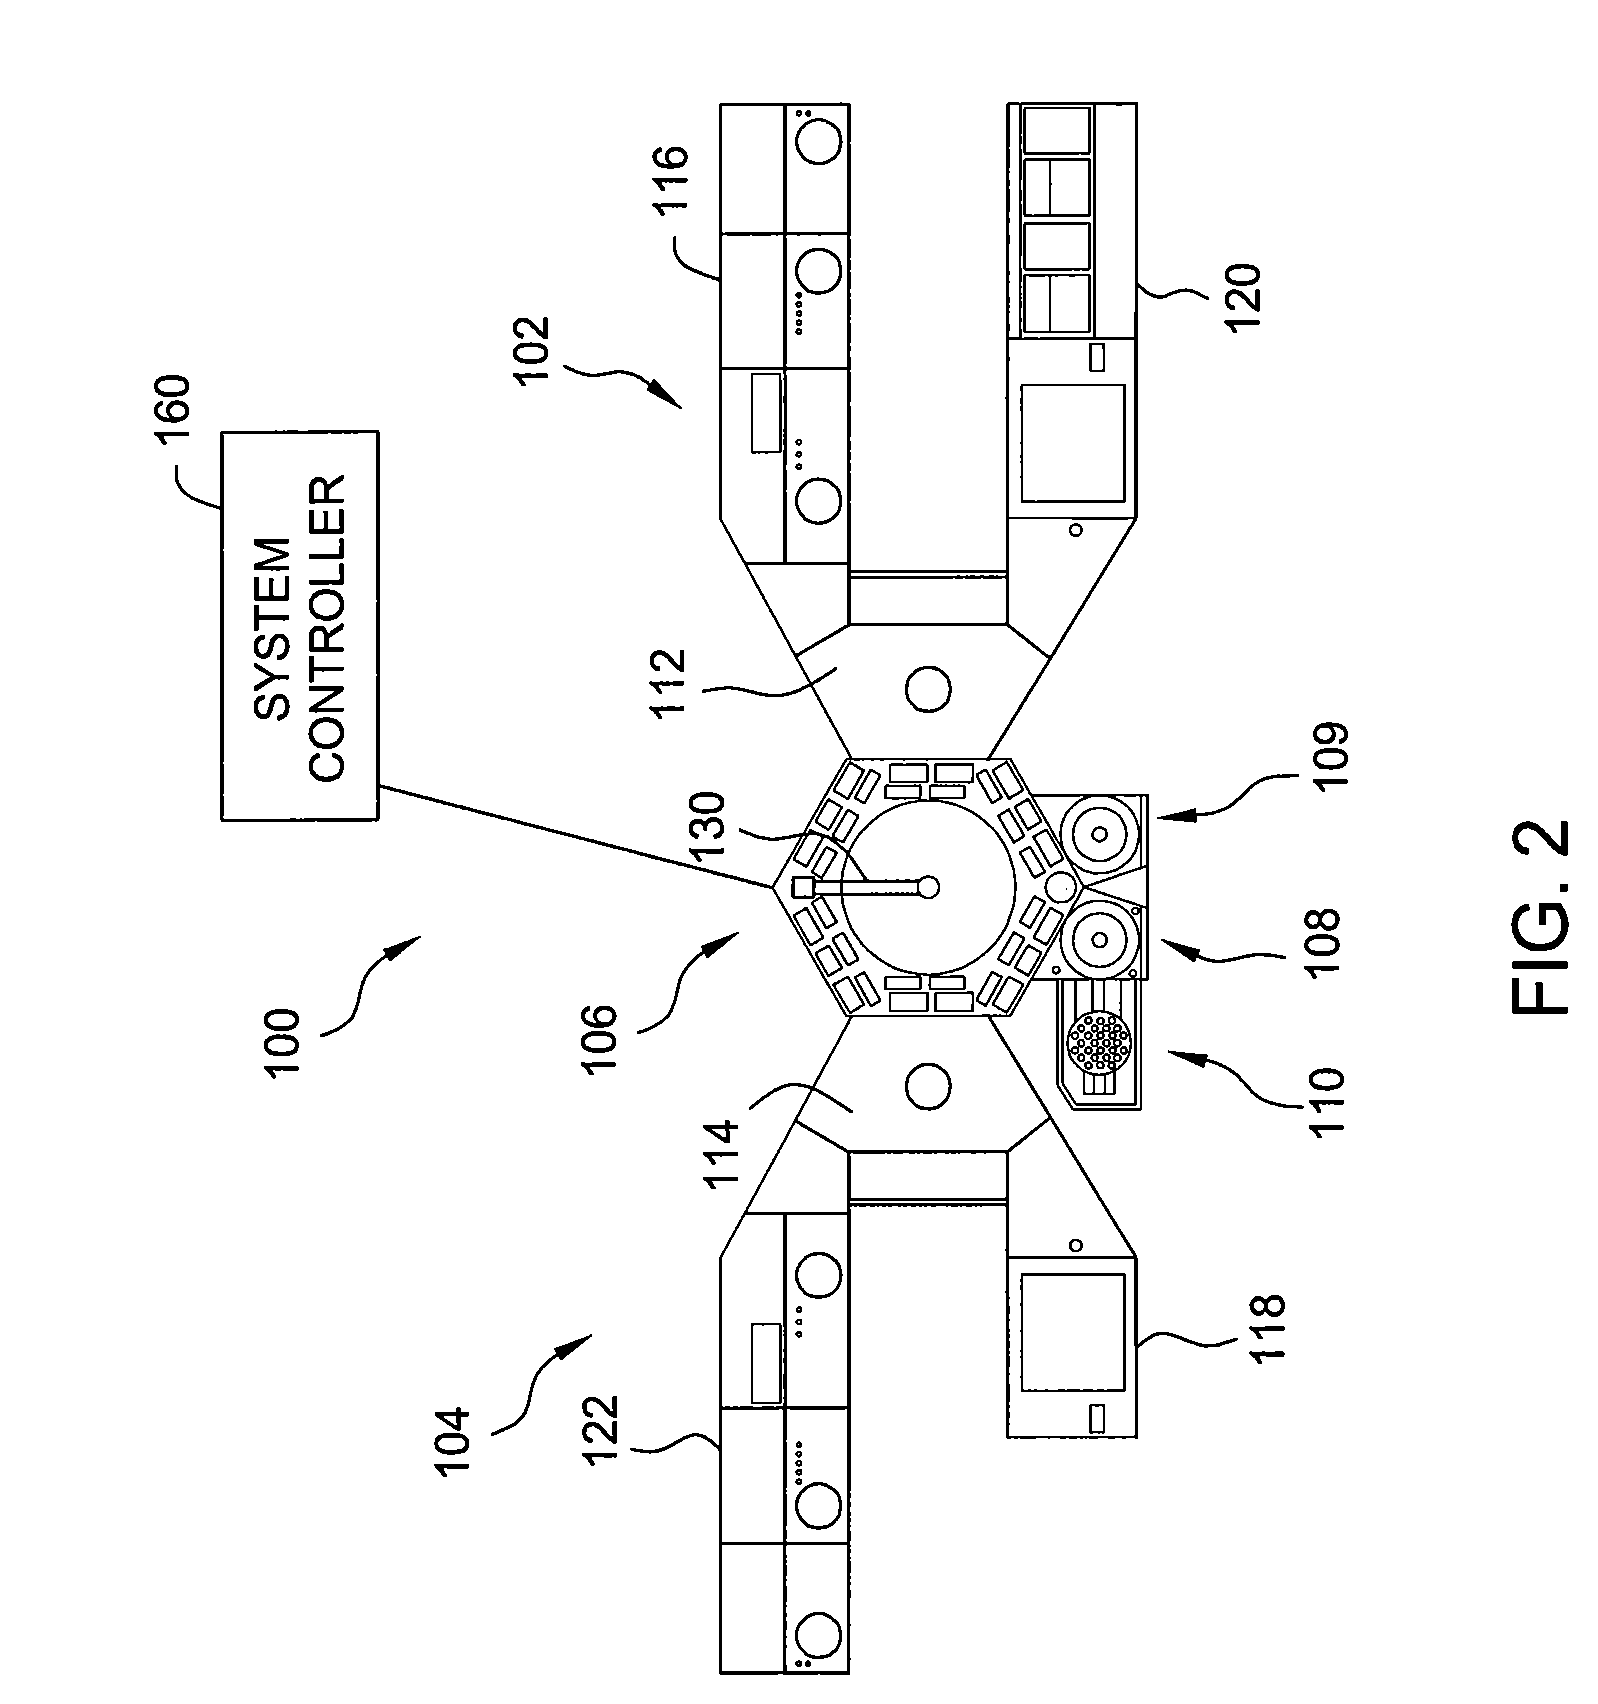 Processing system for fabricating compound nitride semiconductor devices